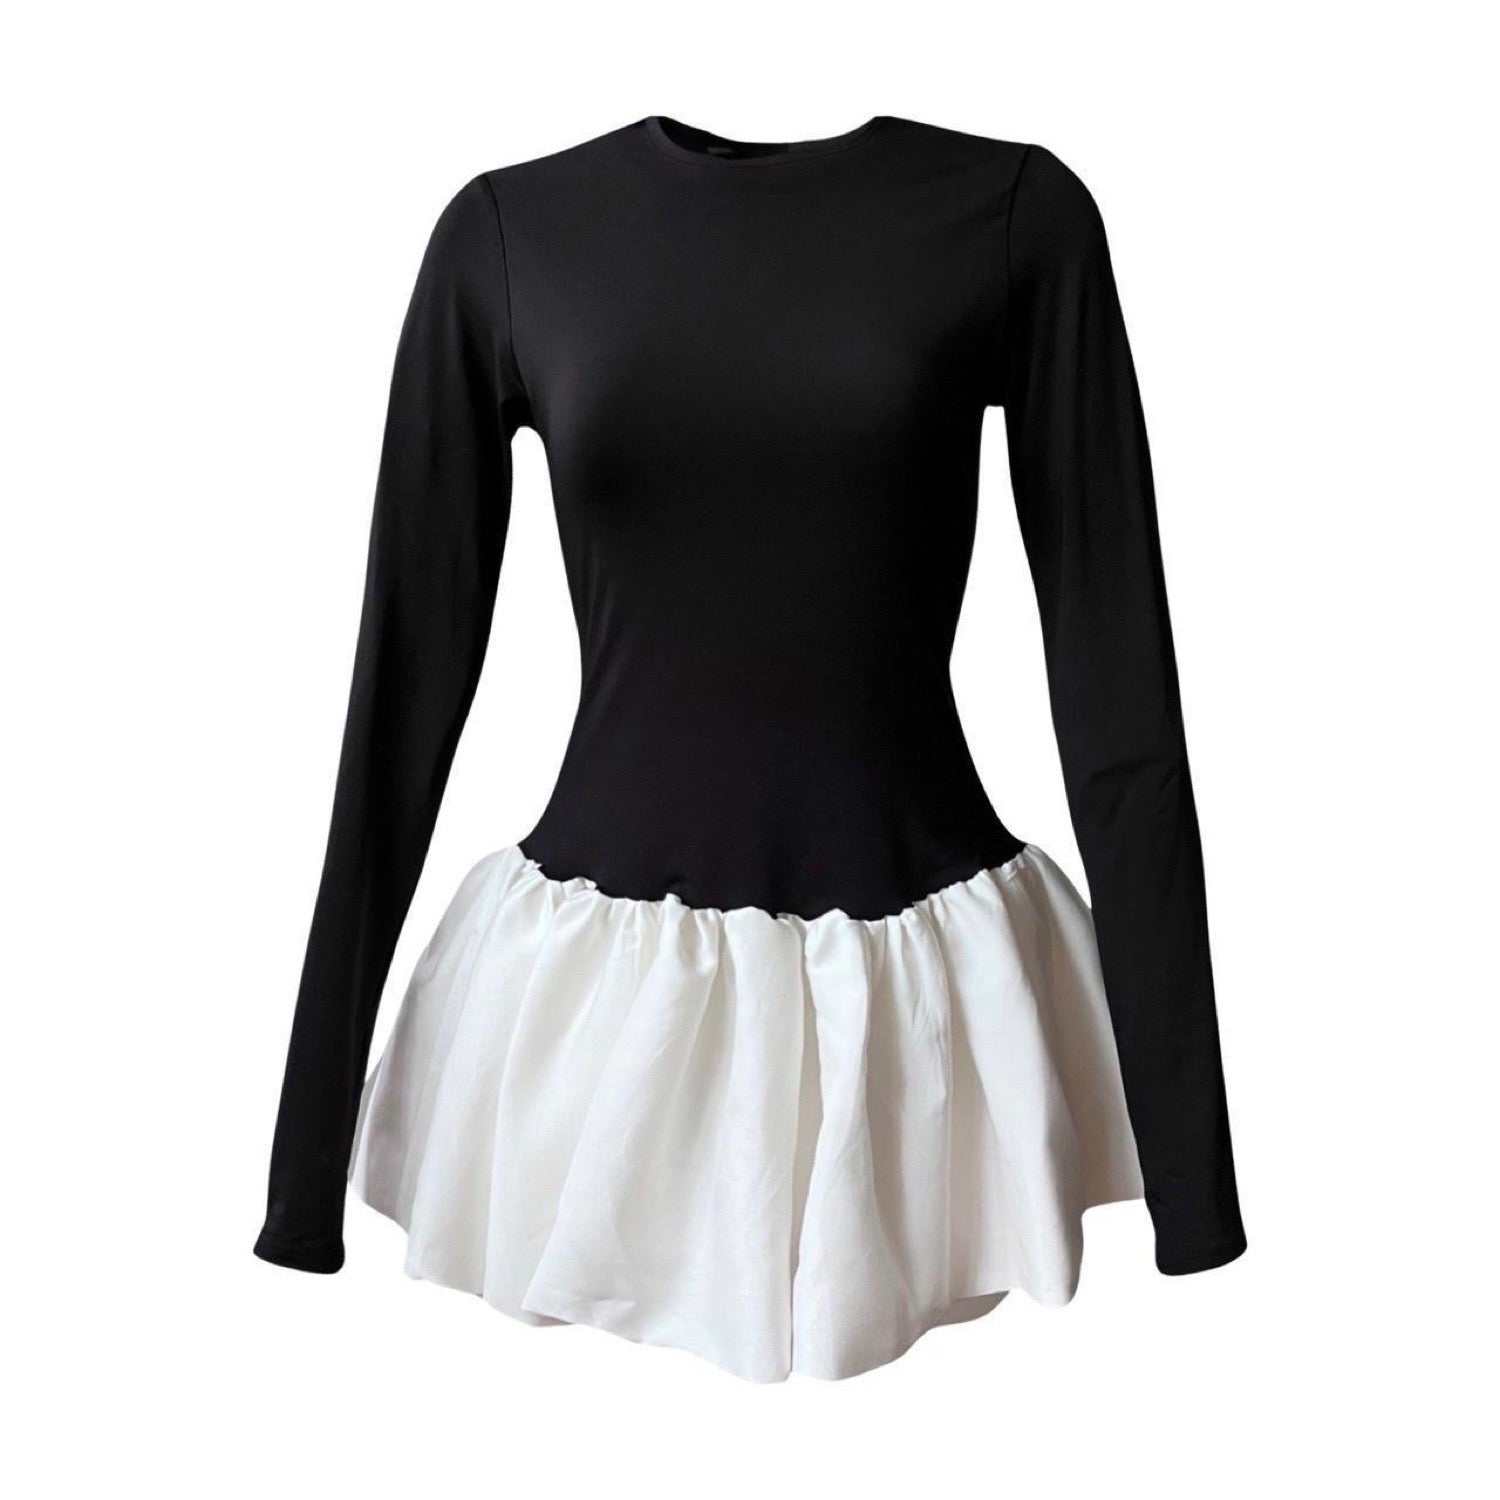 Women’s Black / White Black Top With White Balloon Ruffle Peplum Large London Atelier Byproduct